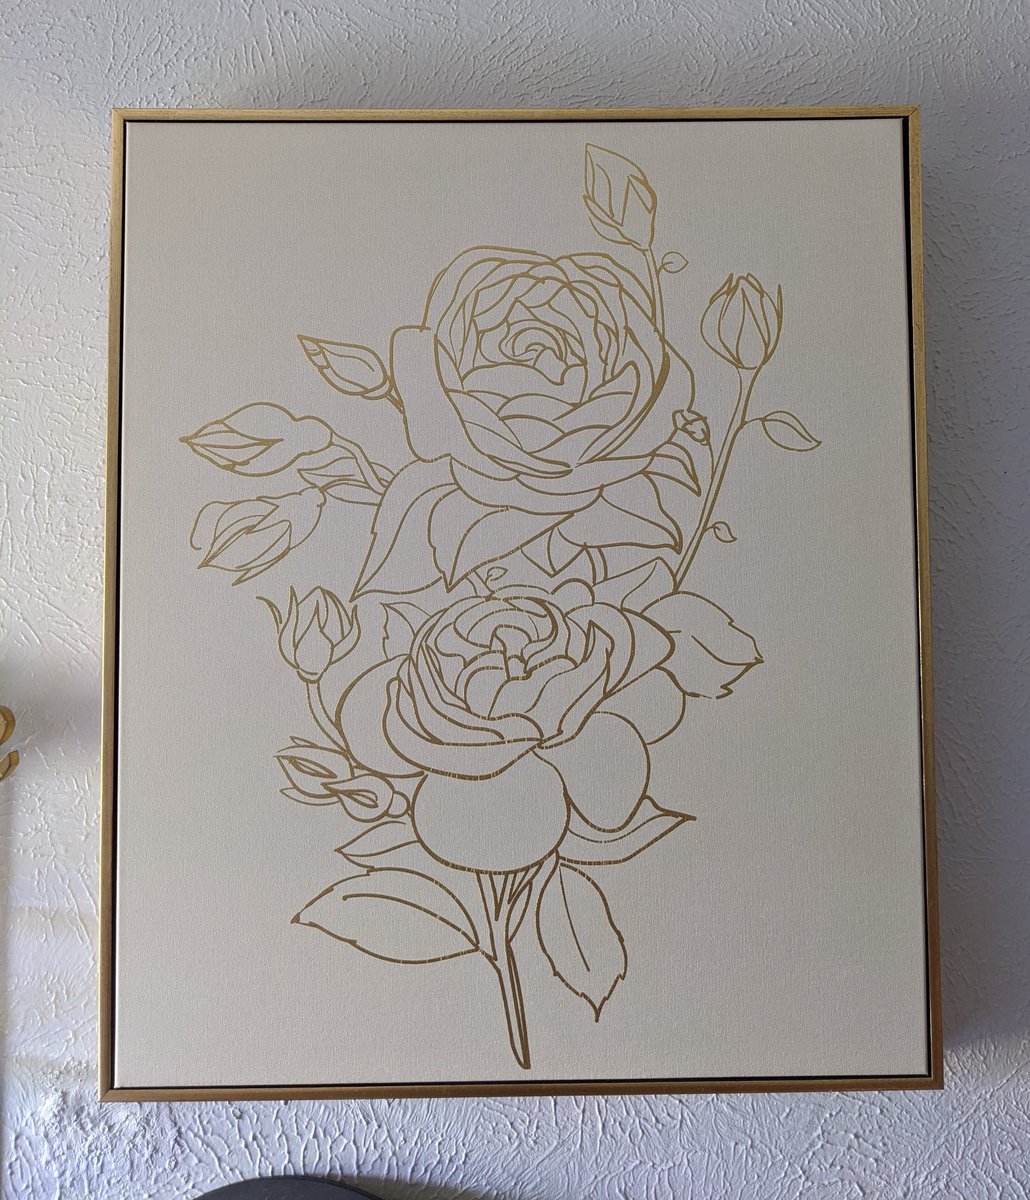 Reselling this gorgeous framed canvas  It's really great if you have other golden elements in the room - as you can see the gold can catch the light for a subtle bit of drama!Size: 20"x24" w/ a 2" deep framePrice: $25Condition: perfect 